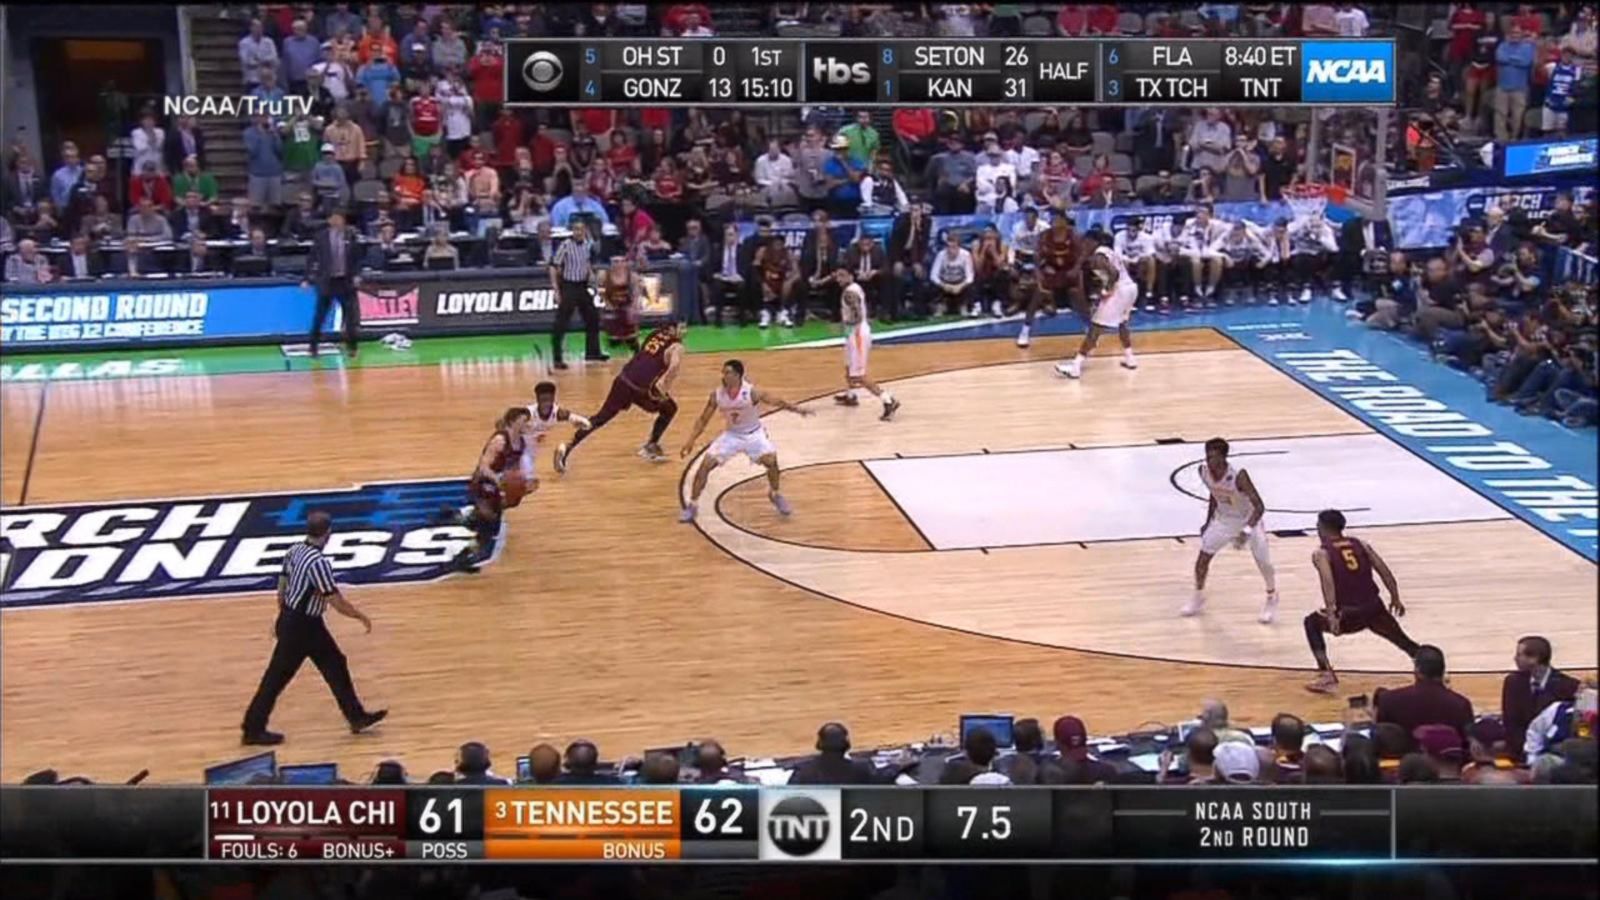 VIDEO: March Madness dubbed 'maddest March ever'